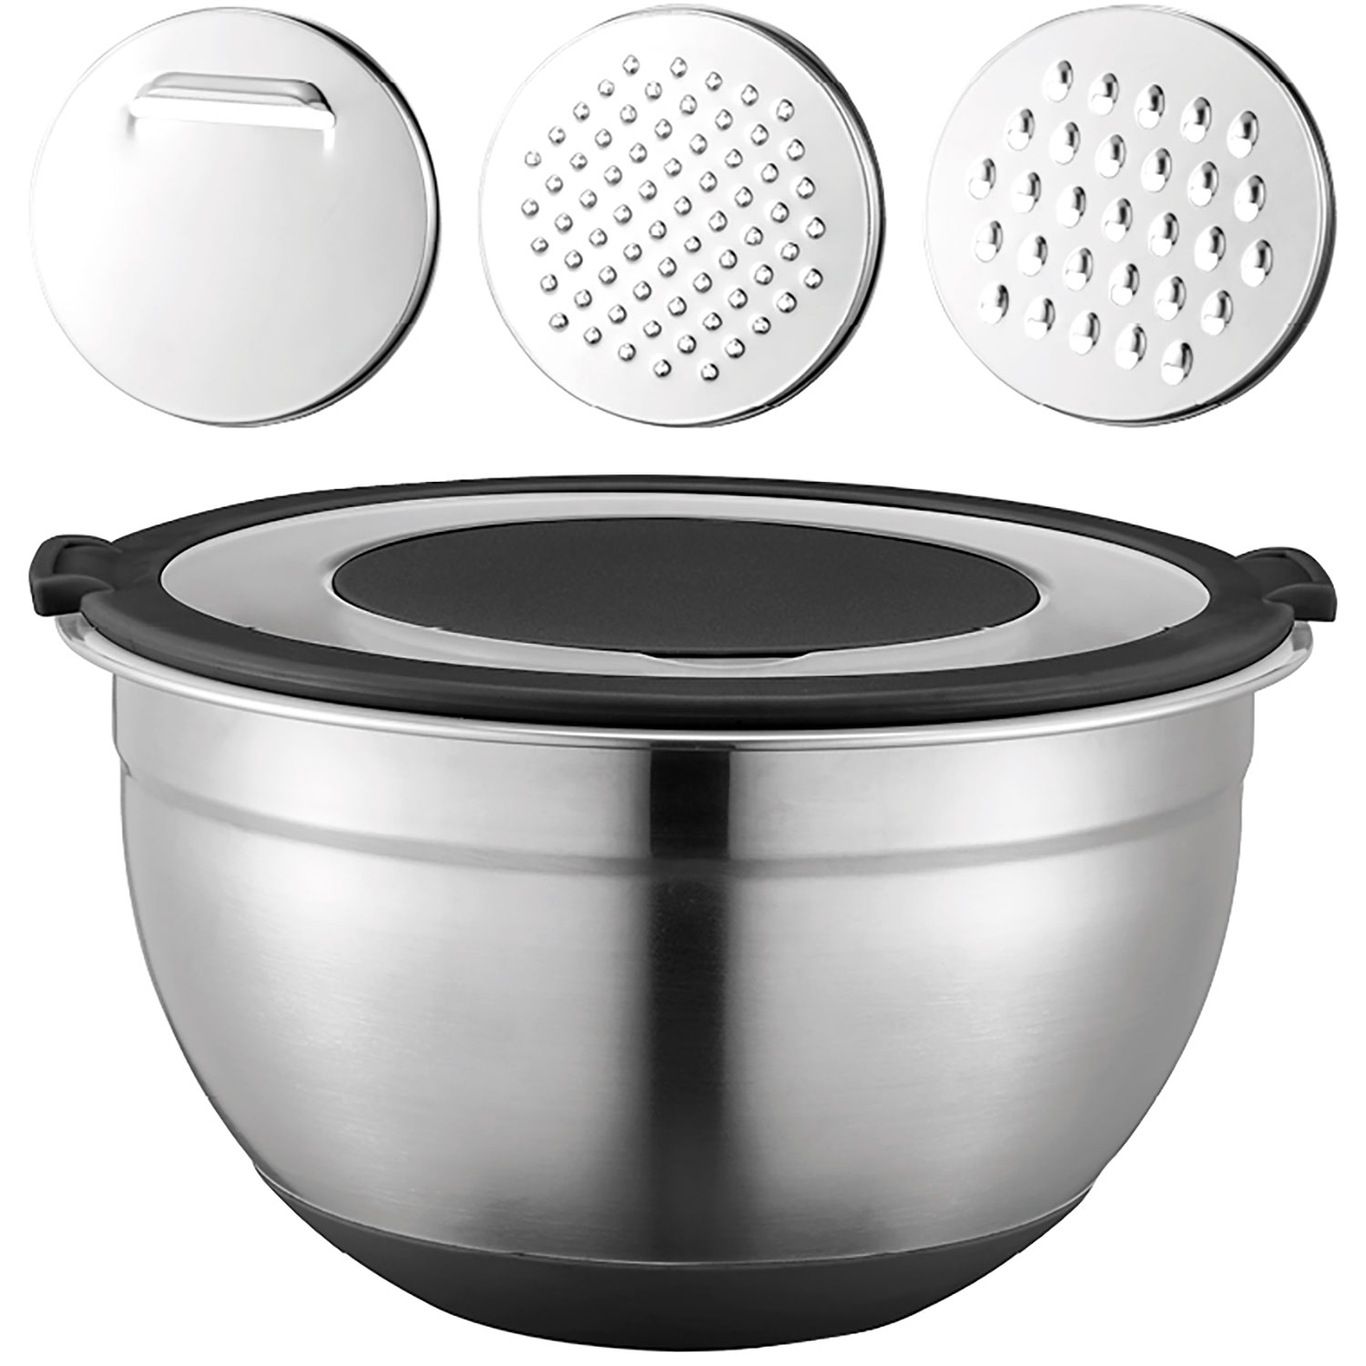 Better Bowl Stainless steel w lid & 3 grater